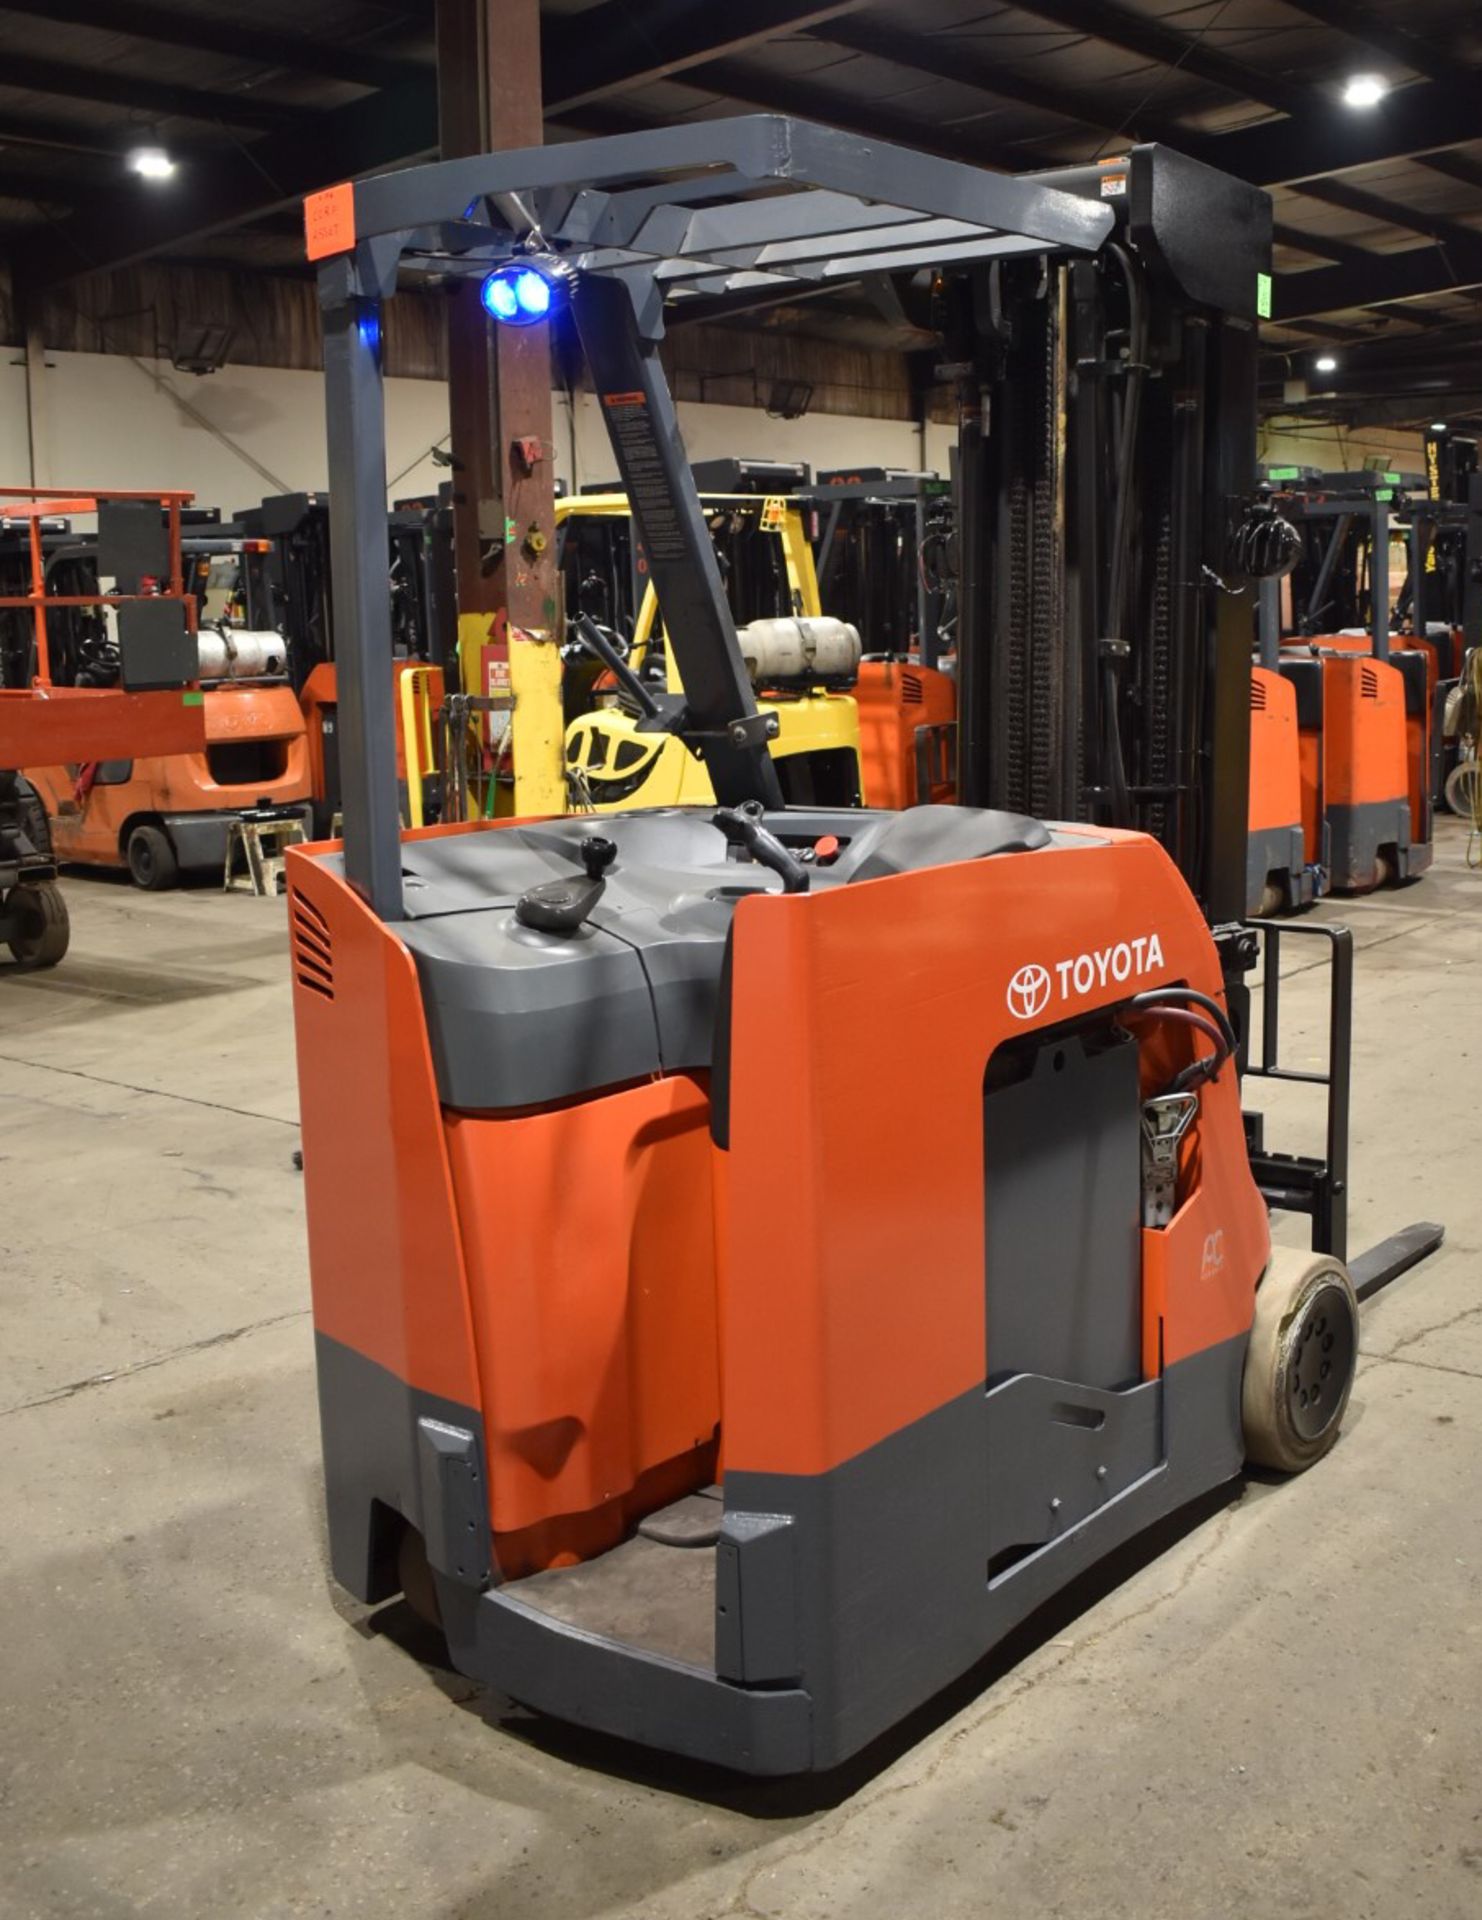 TOYOTA (2017) 8BNCU20 STAND ON ELECTRIC FORKLIFT WITH, 4,000LBS CAPACITY, 36V BATTERY, 276.5" MAX - Image 3 of 6